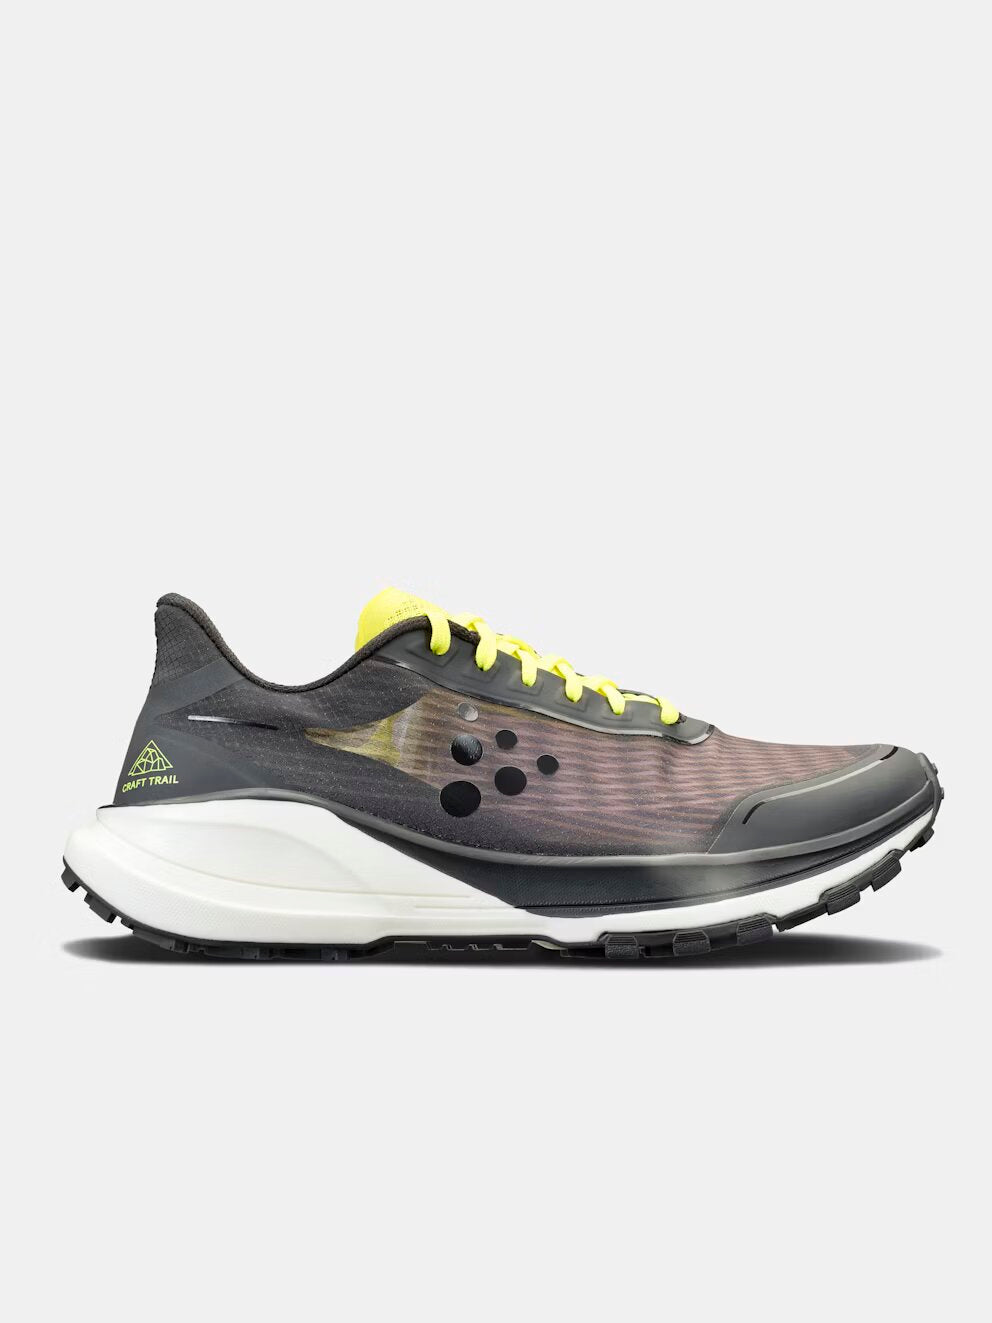 Black/neon yellow pure trail sneakers